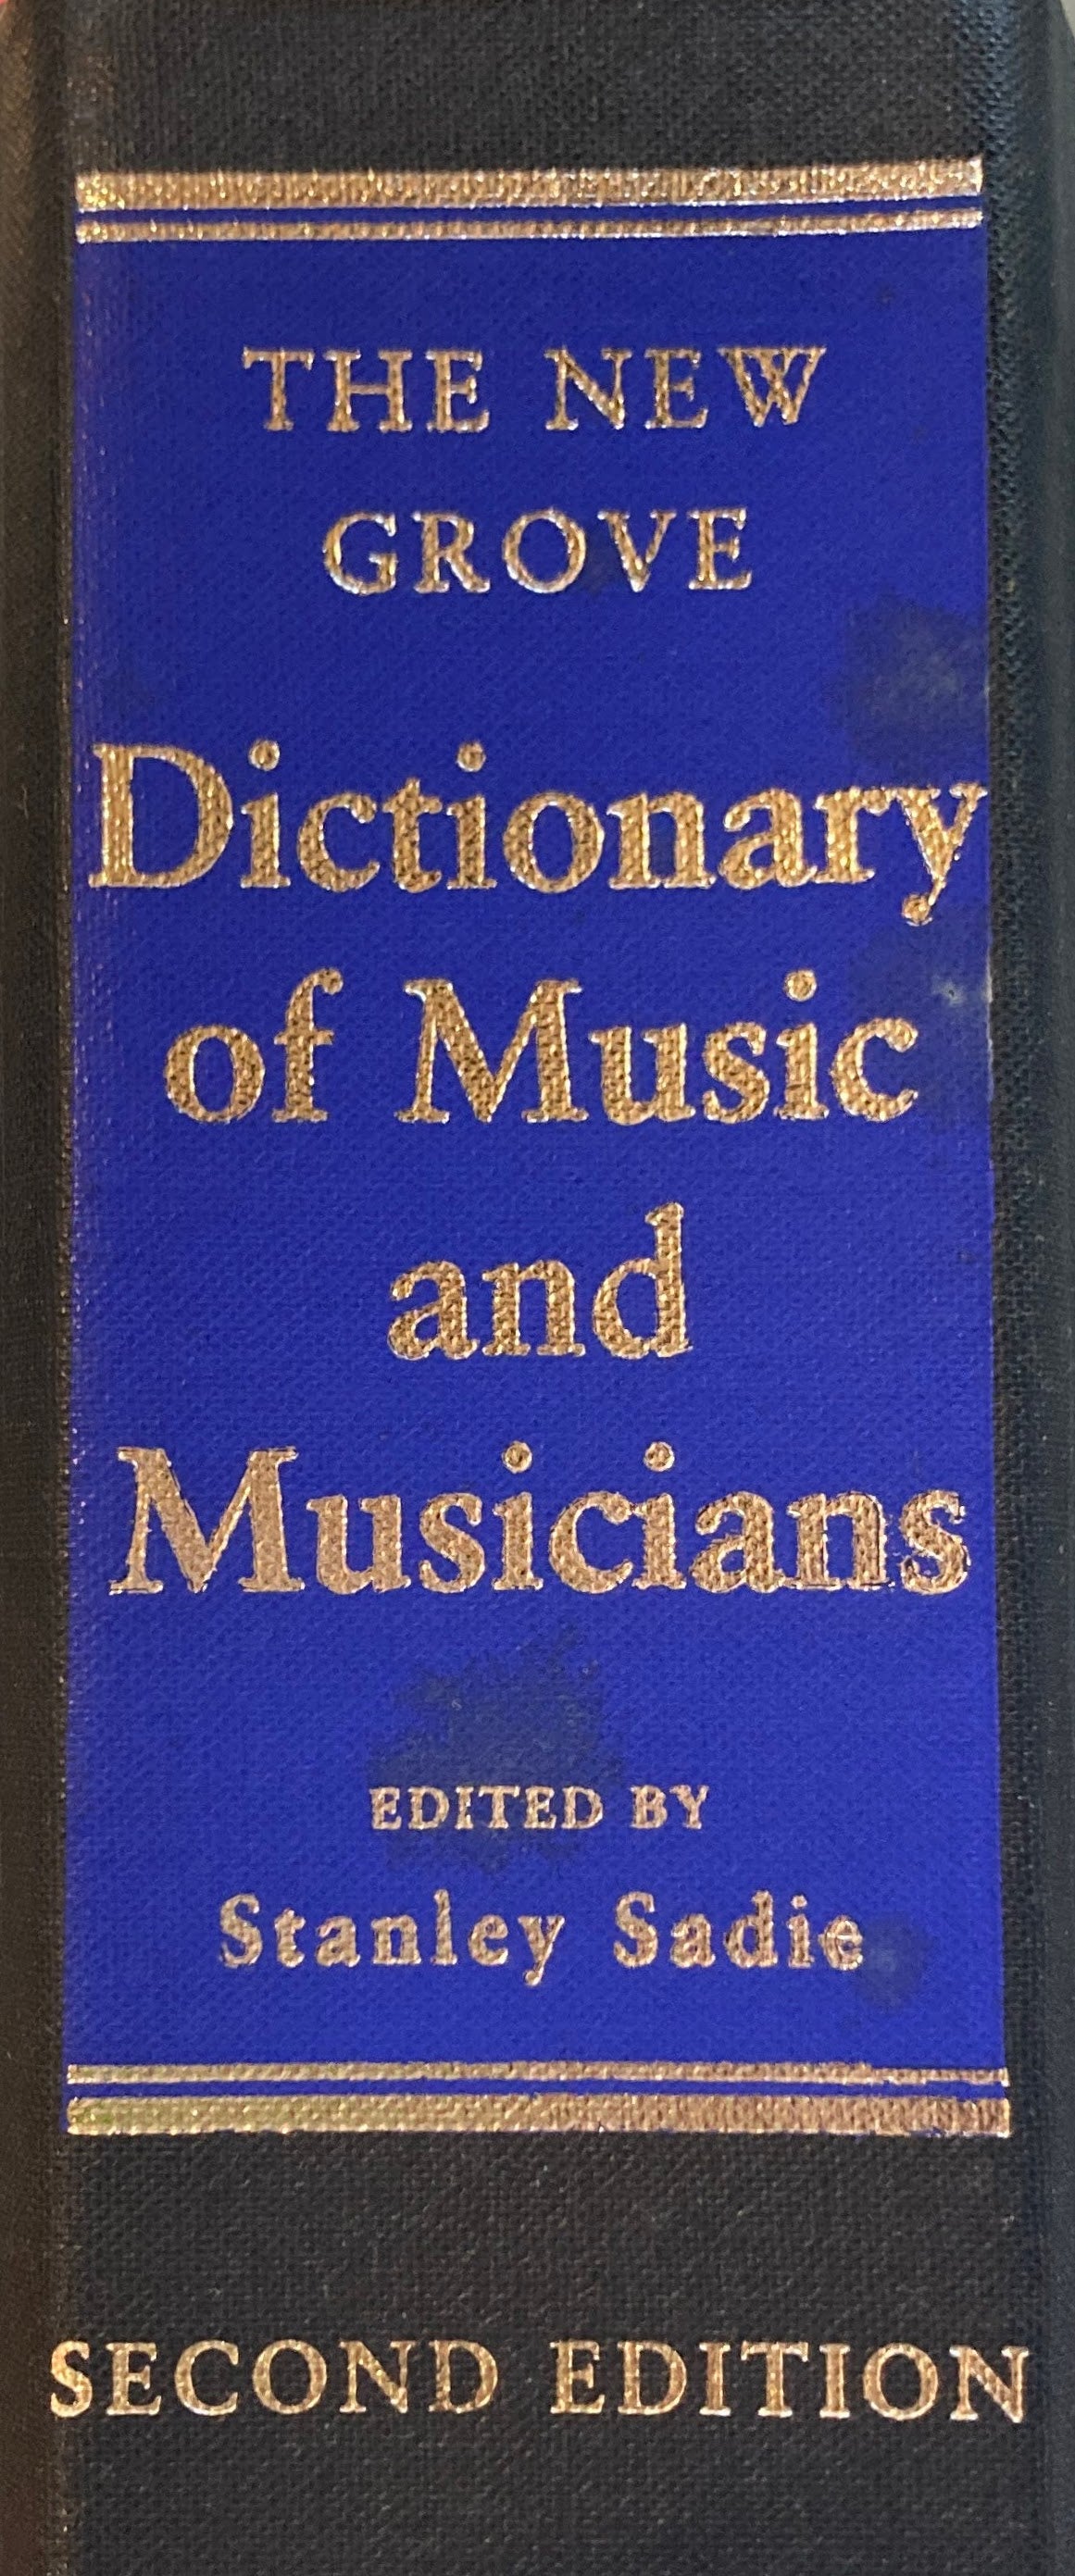 The New Grove Dictionary of Music and Musicians second edition